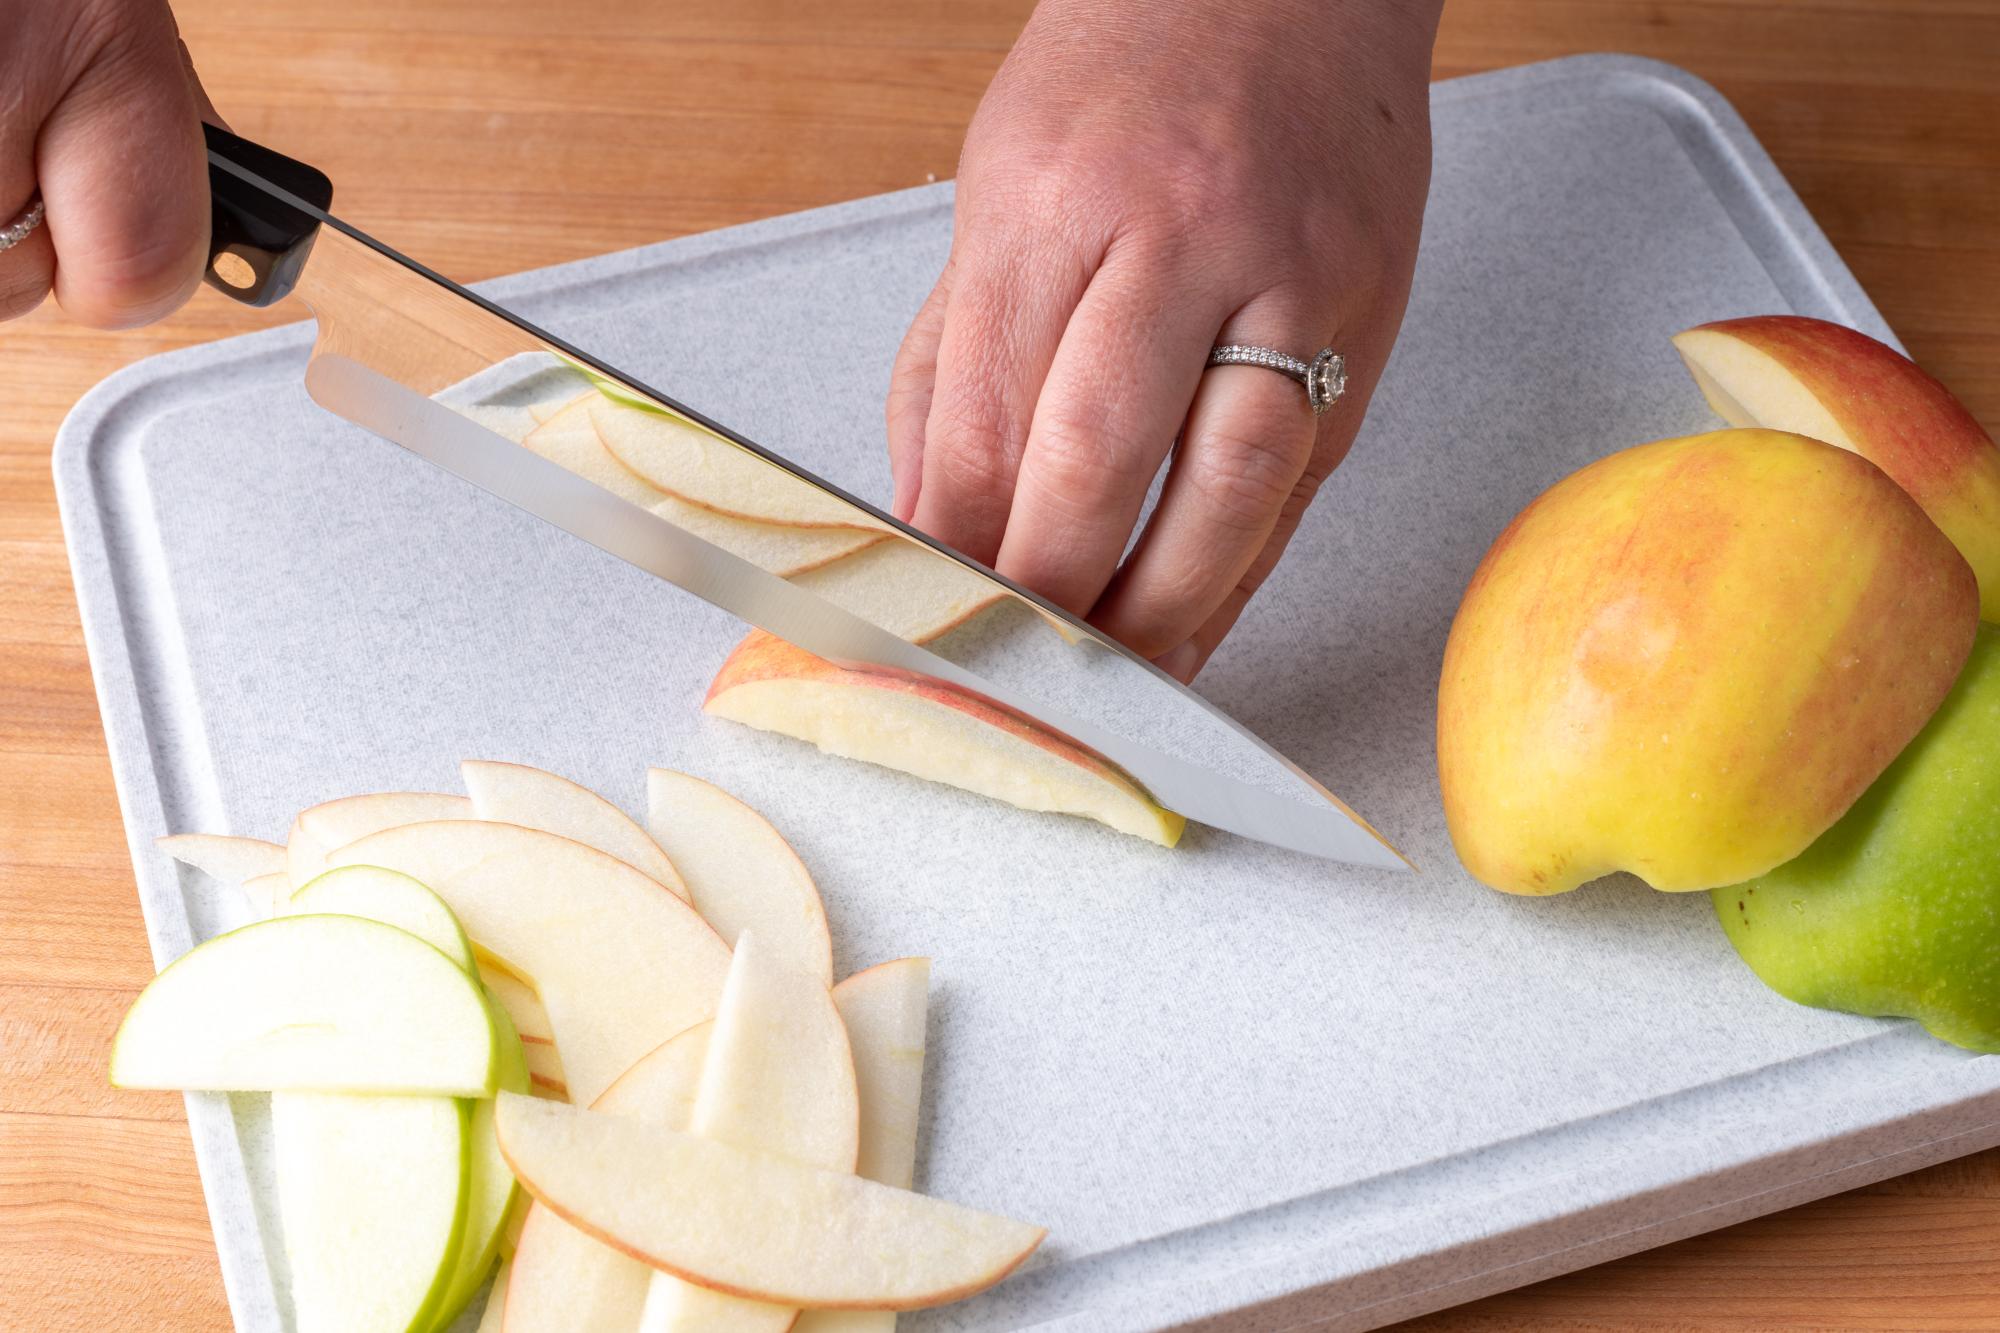 The Petite Chef is perfect for thinly slicing the apples.